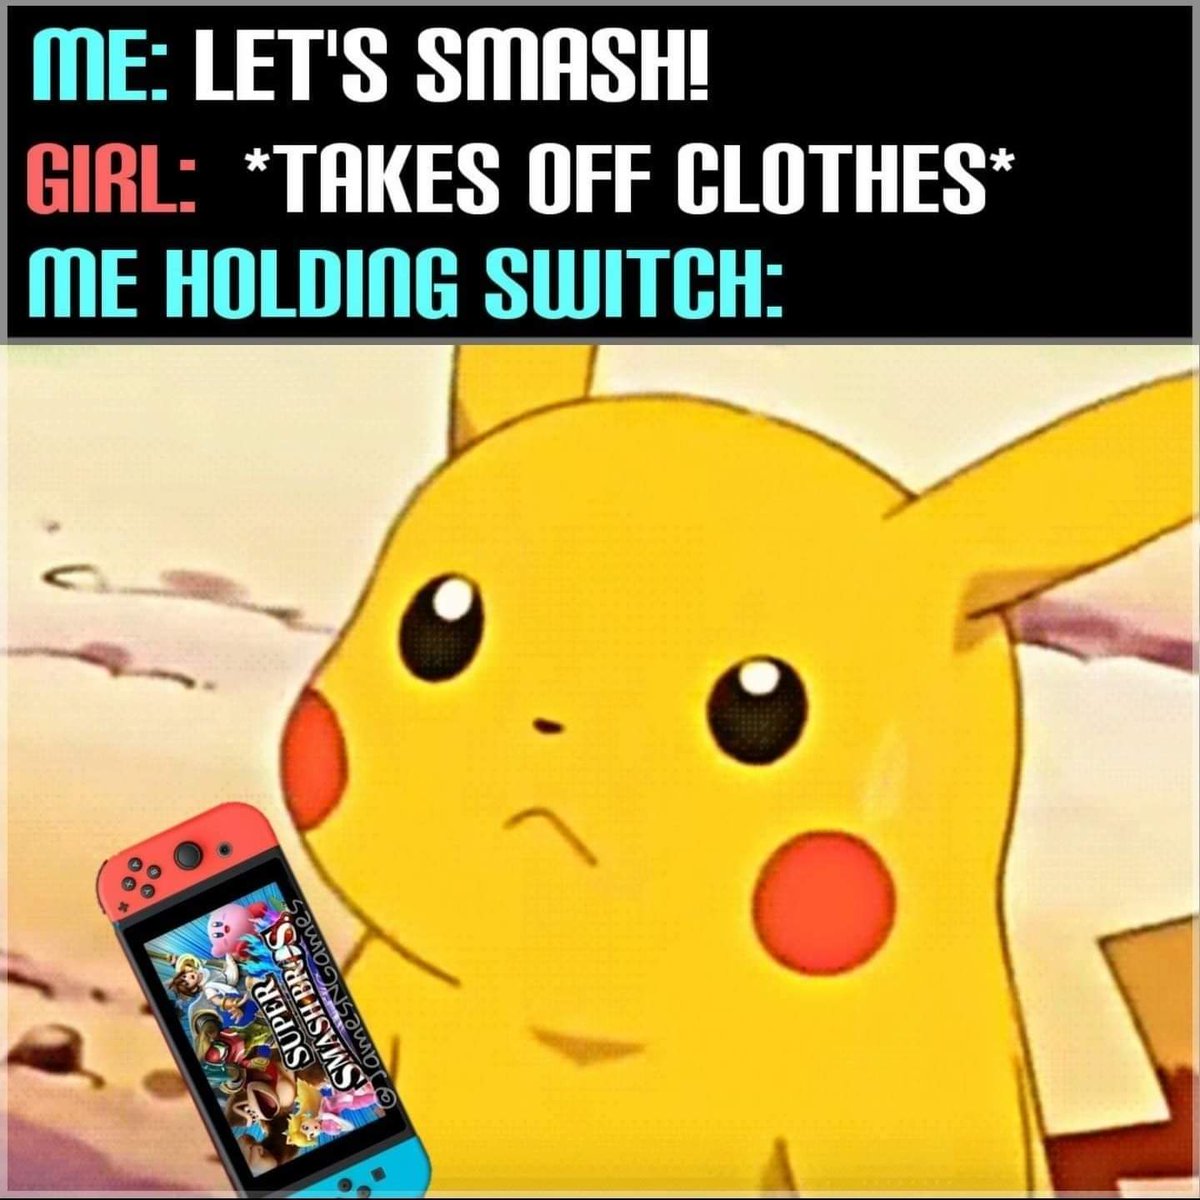 funny gaming memes - the big texan steak ranch & brewery - Me Let'S Smash! Girl Takes Off Clothes Me Holding Switch Super Smash Br.Gs.